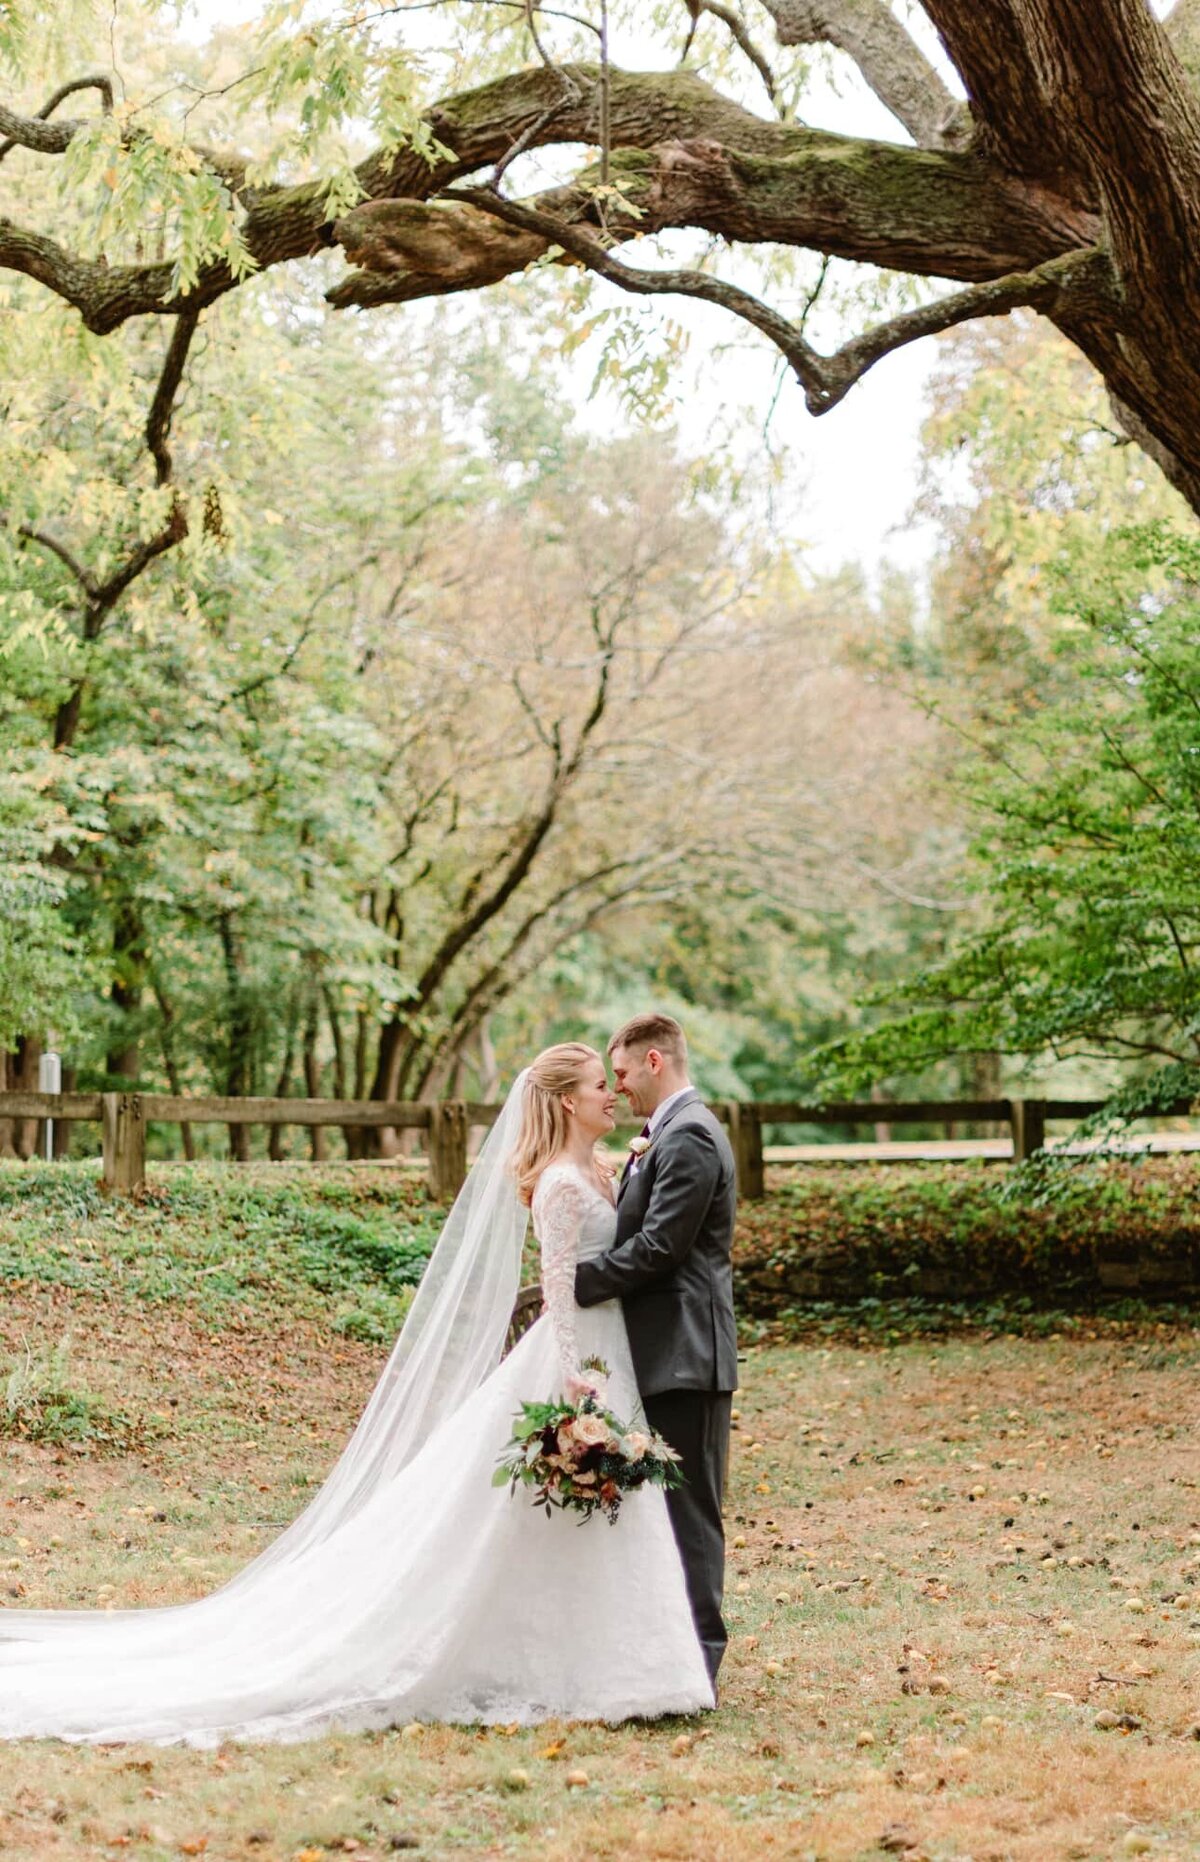 Bride and groom embrace under tree at Woodend Sanctuary wedding